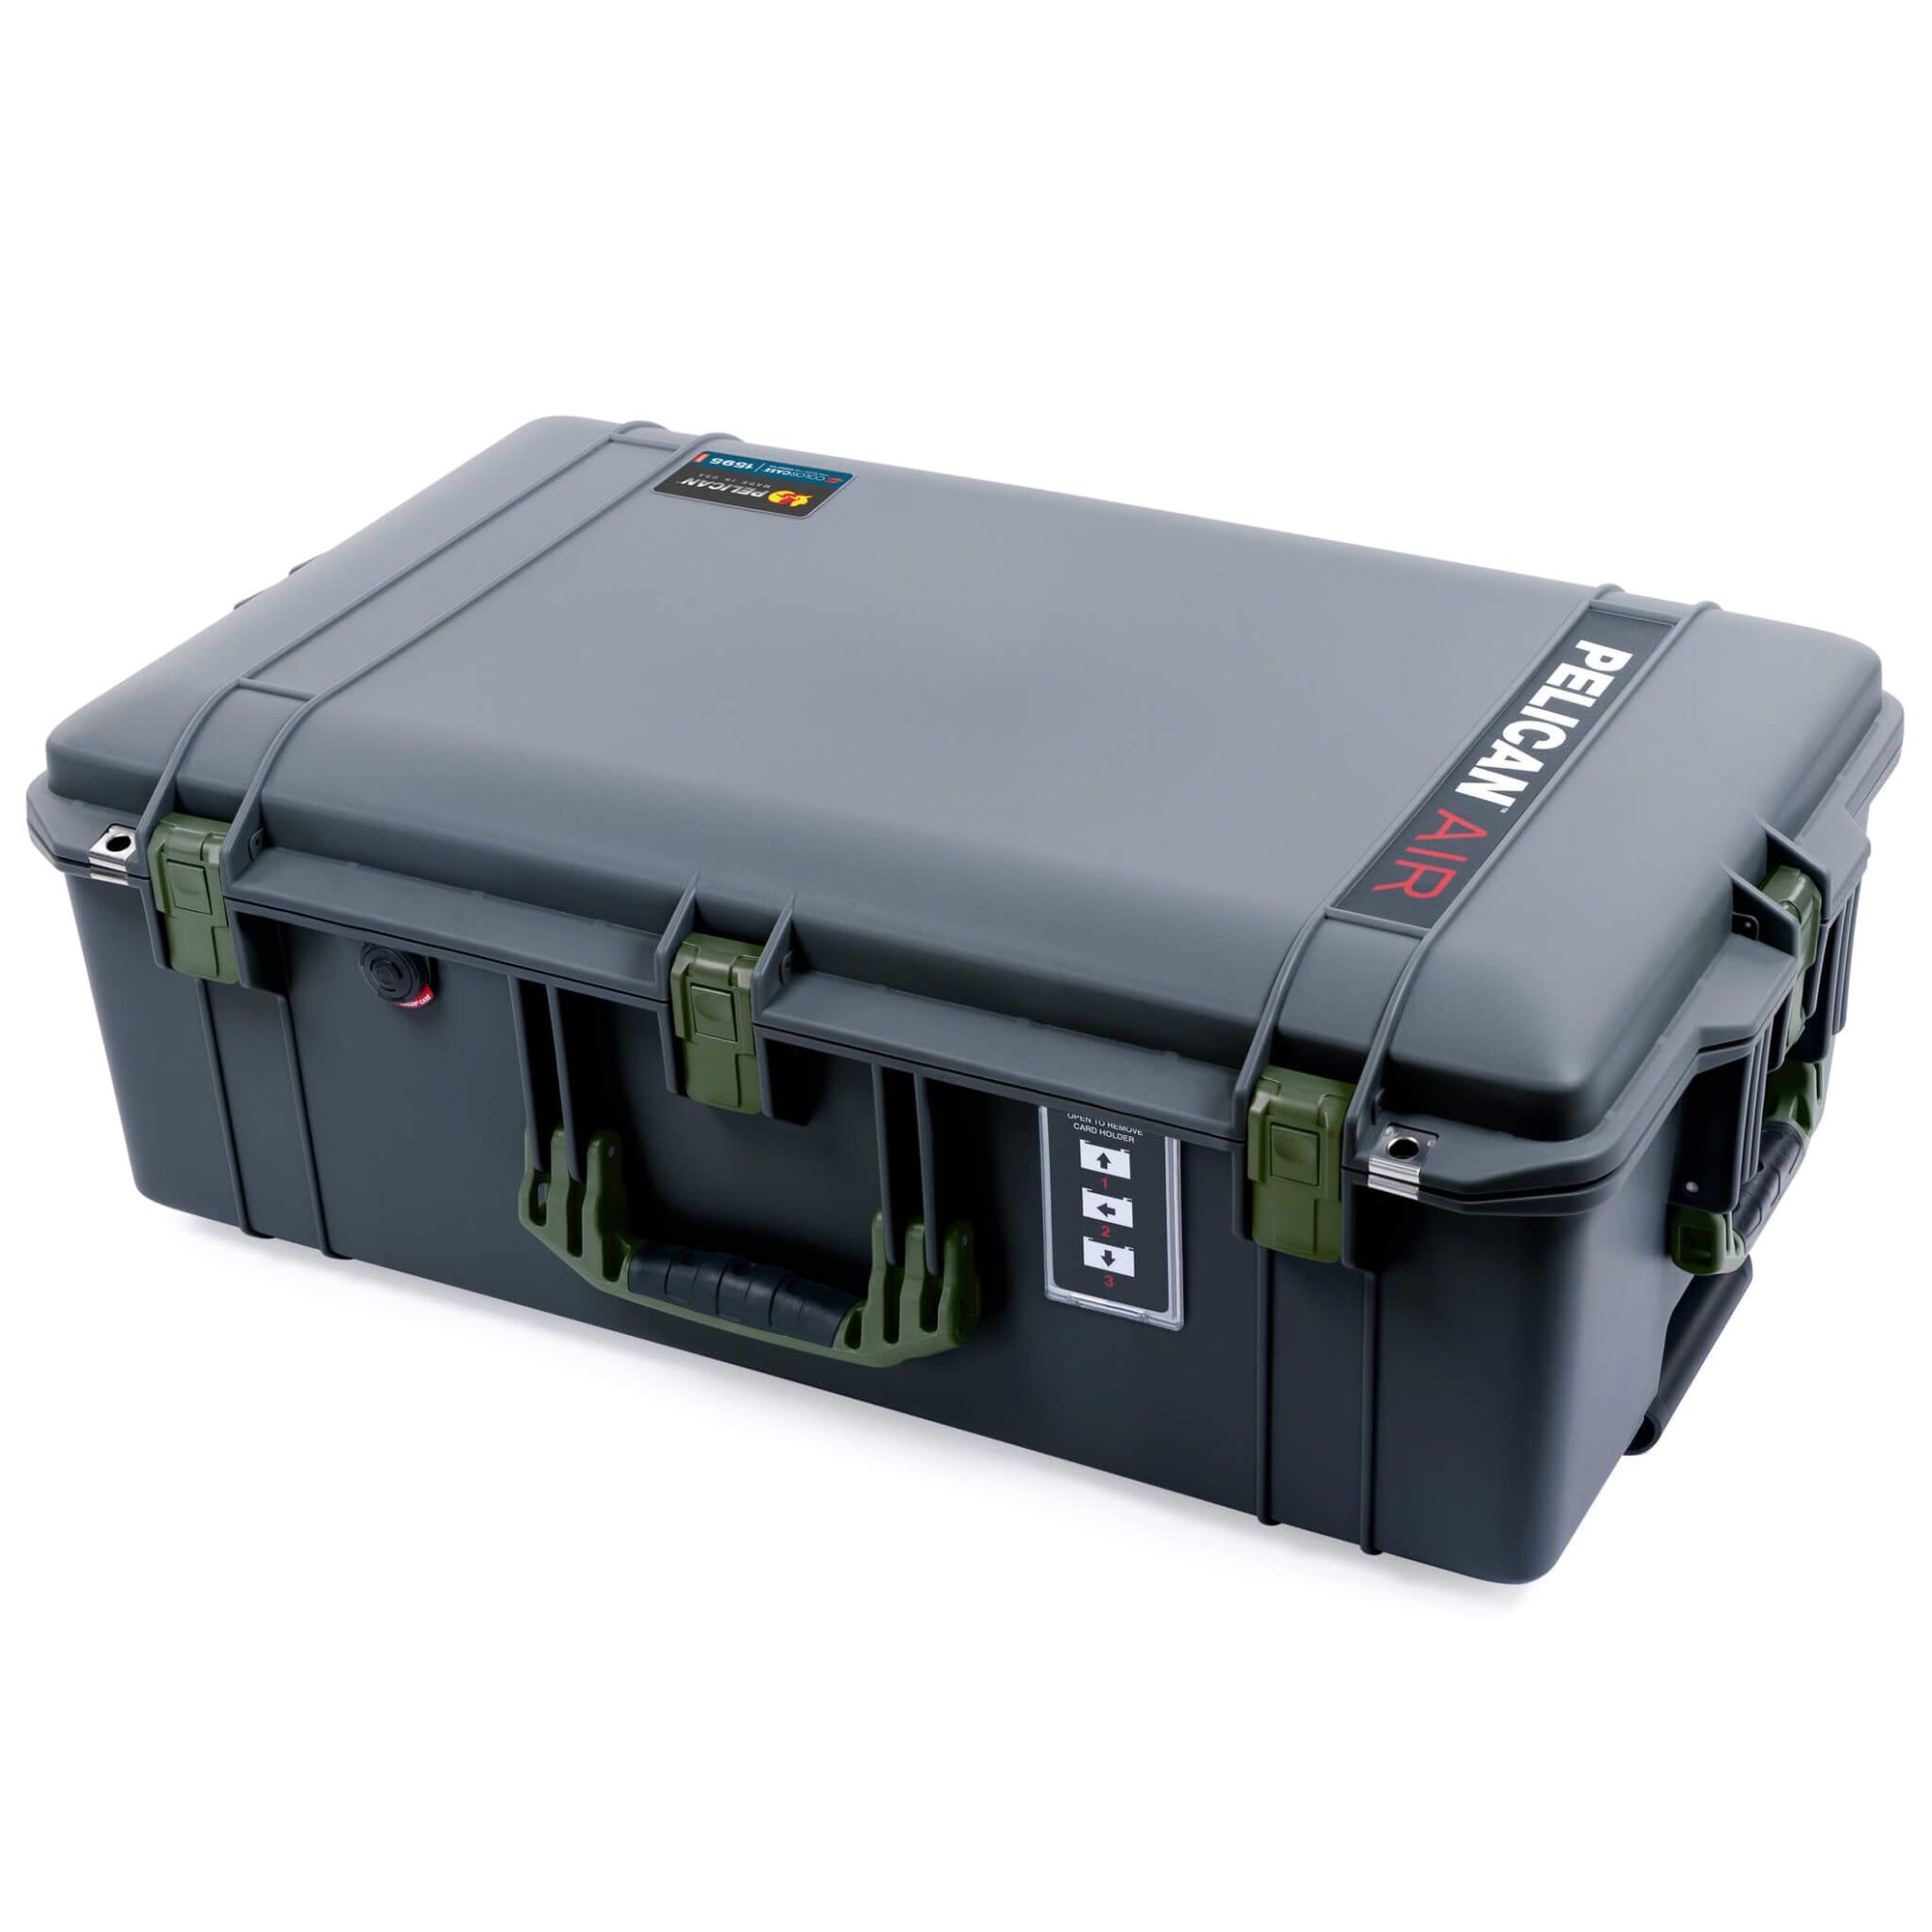 Pelican 1595 Air Case, Charcoal with OD Green Handles & Latches ColorCase 